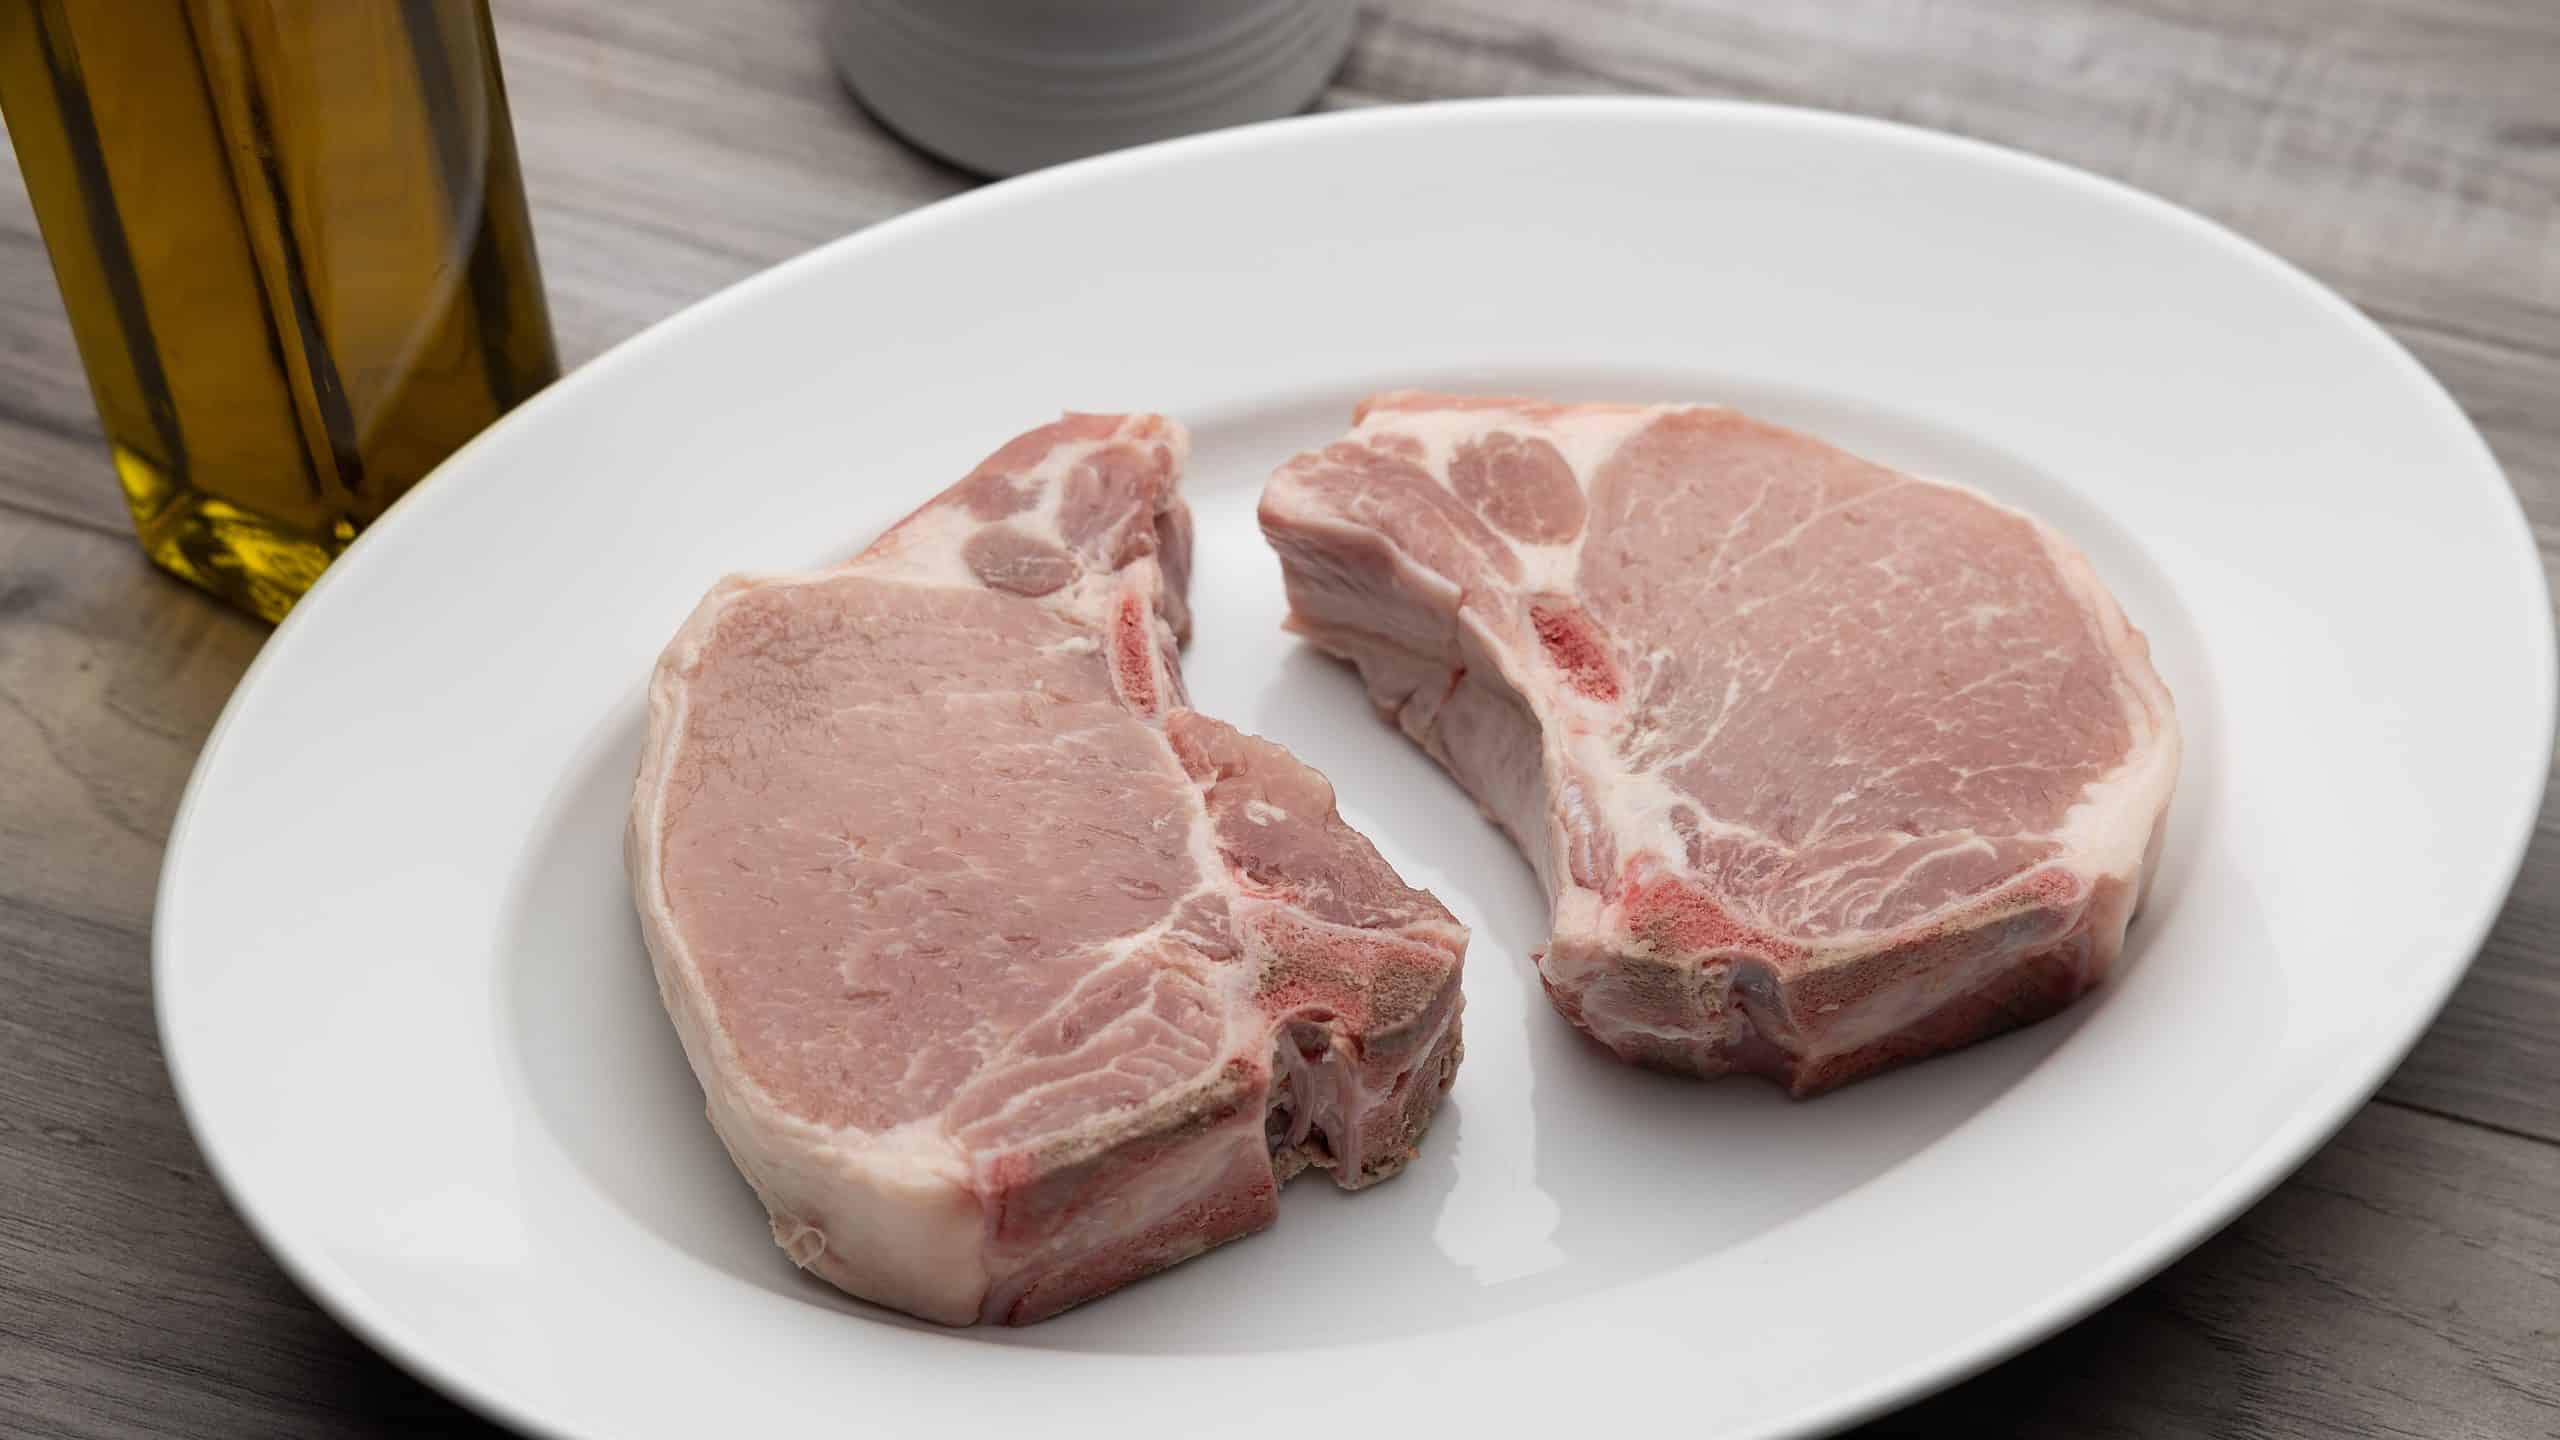 Can Your Dog Eat Pork Safely? It Depends